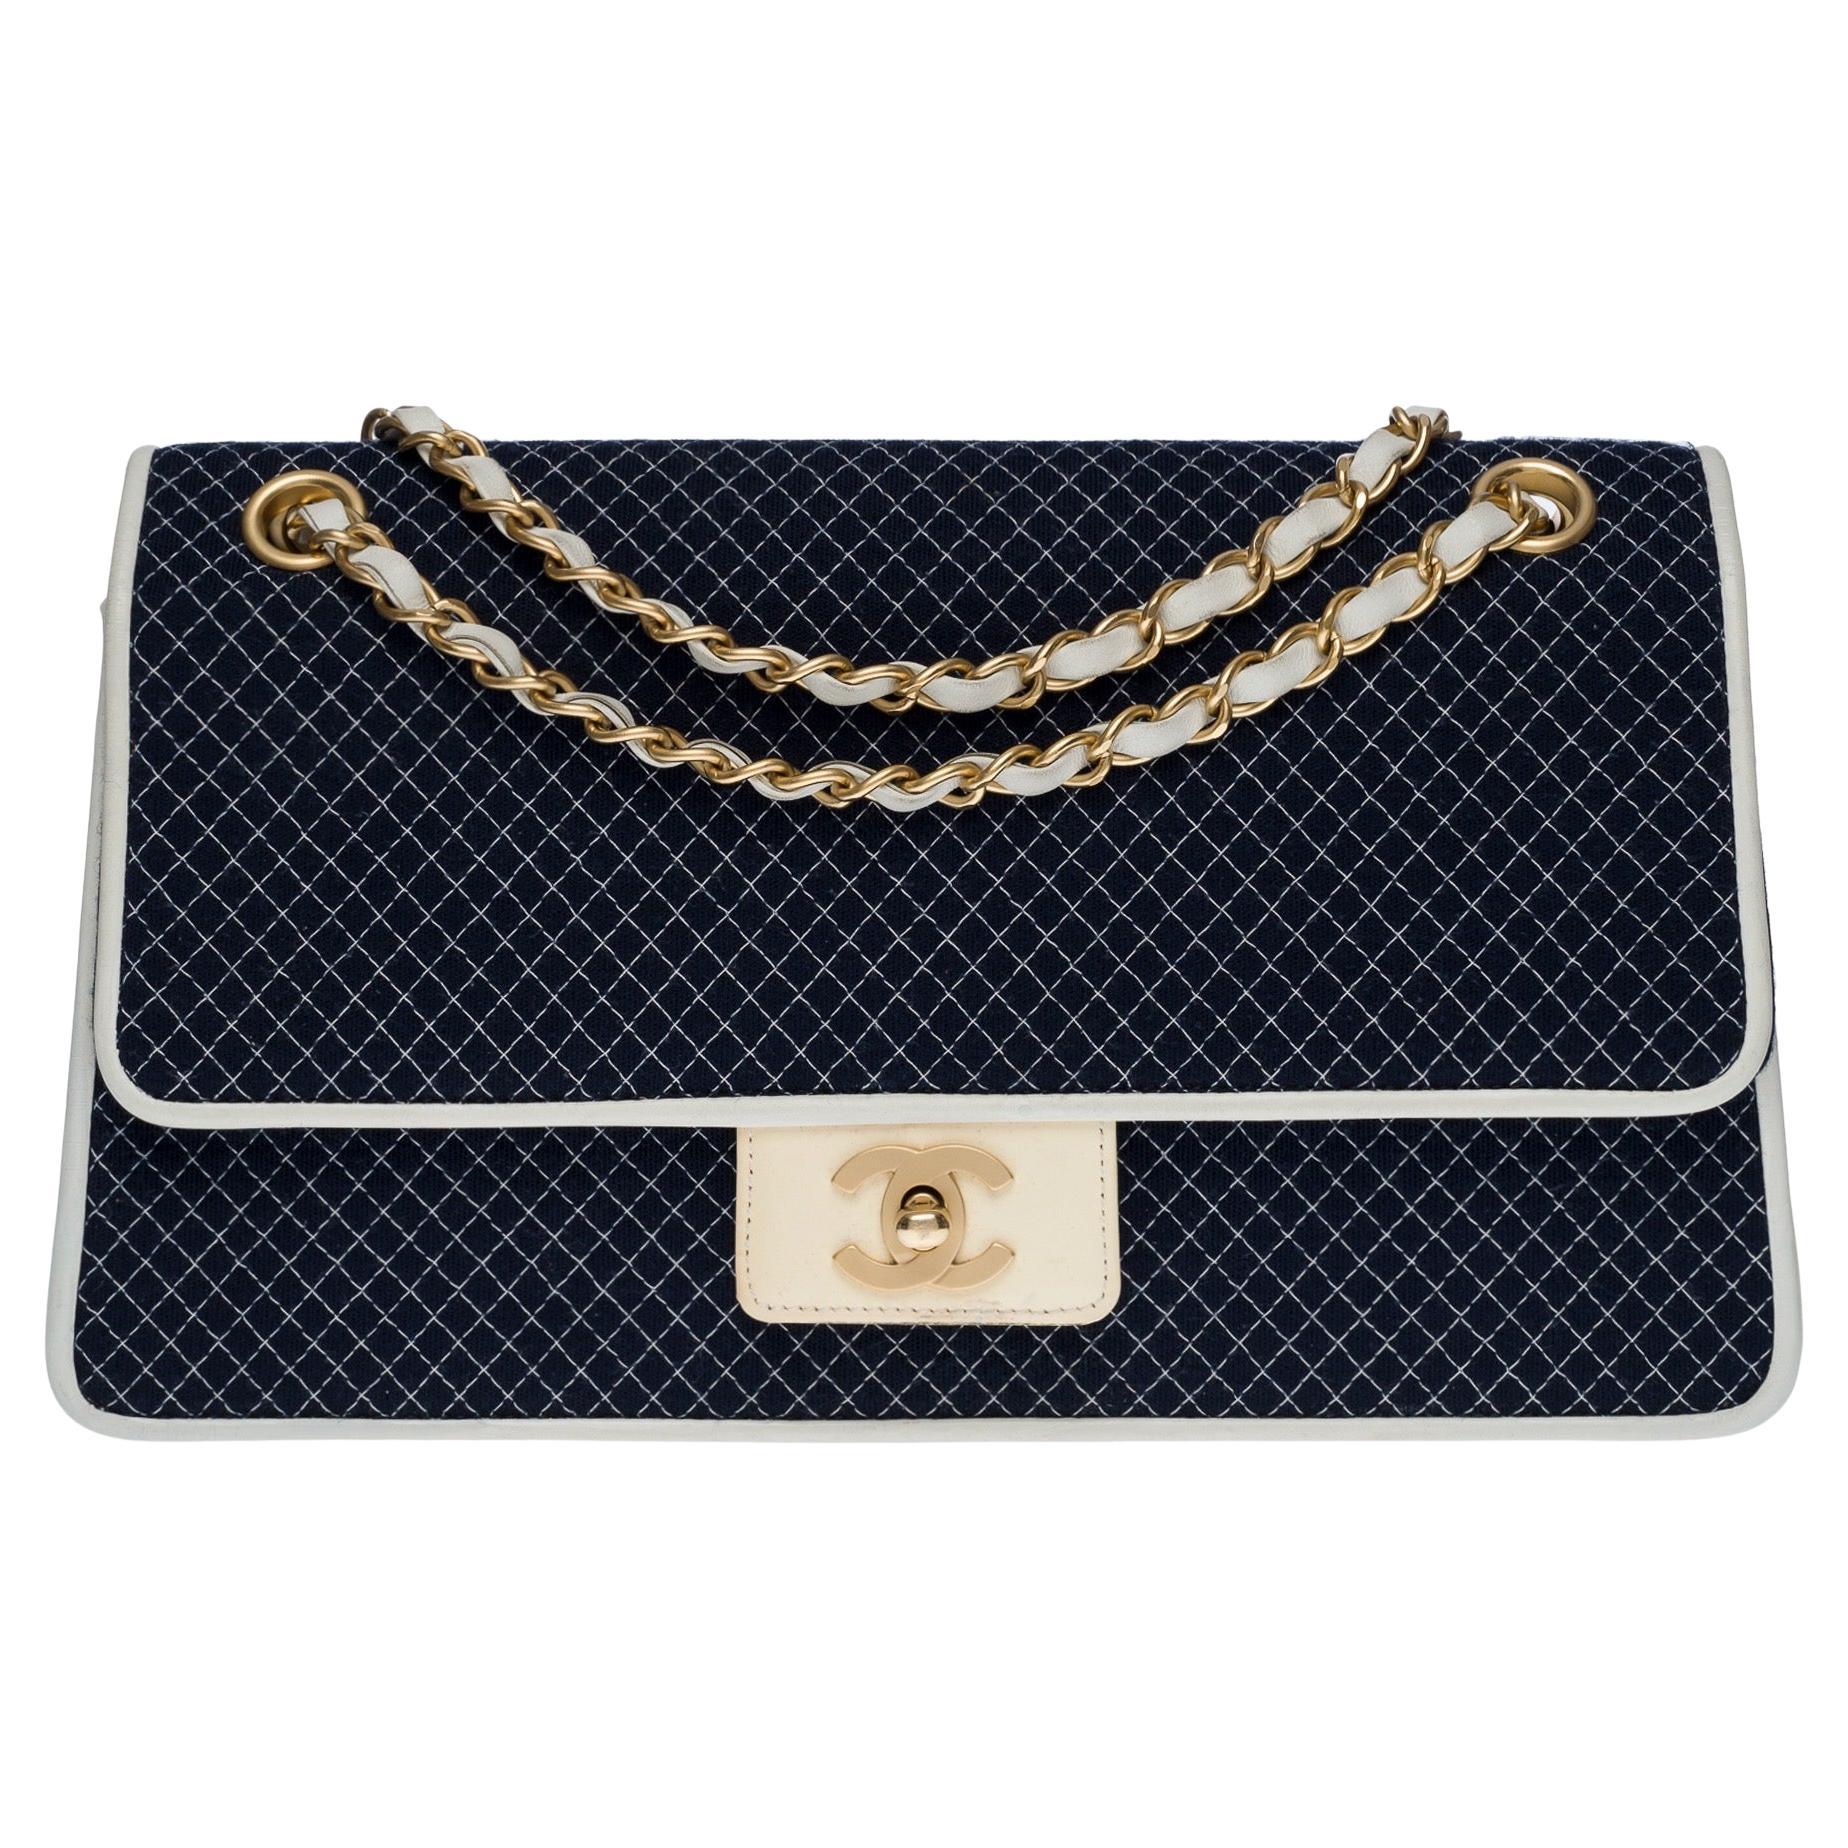 Chanel Timeless/Classic shoulder bag in navy blue jersey, GHW For Sale